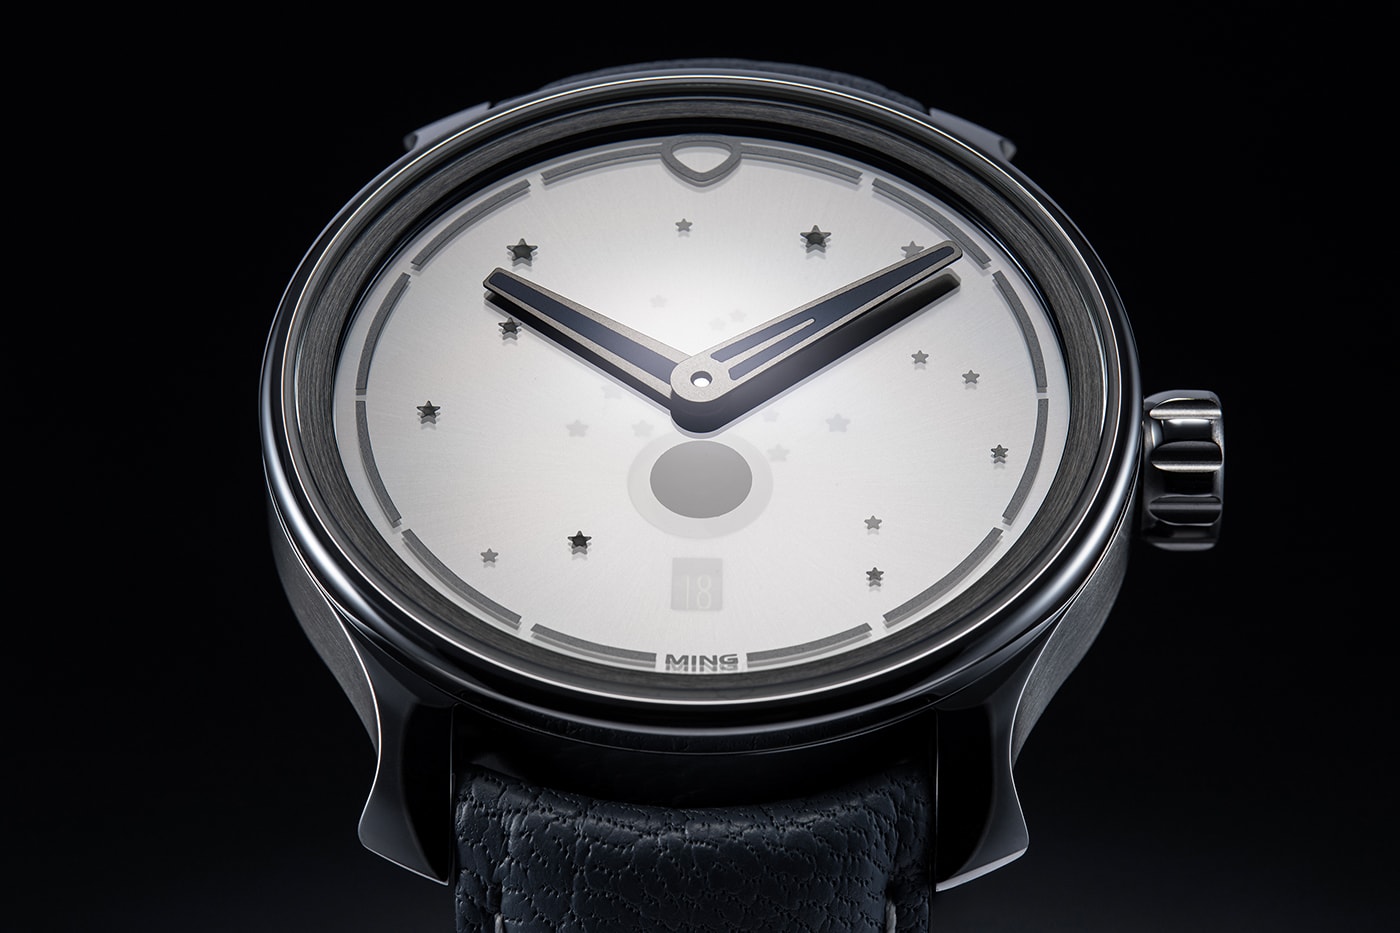 MING 37.05 Series 2 Moonphase Limited-Edition Release Info